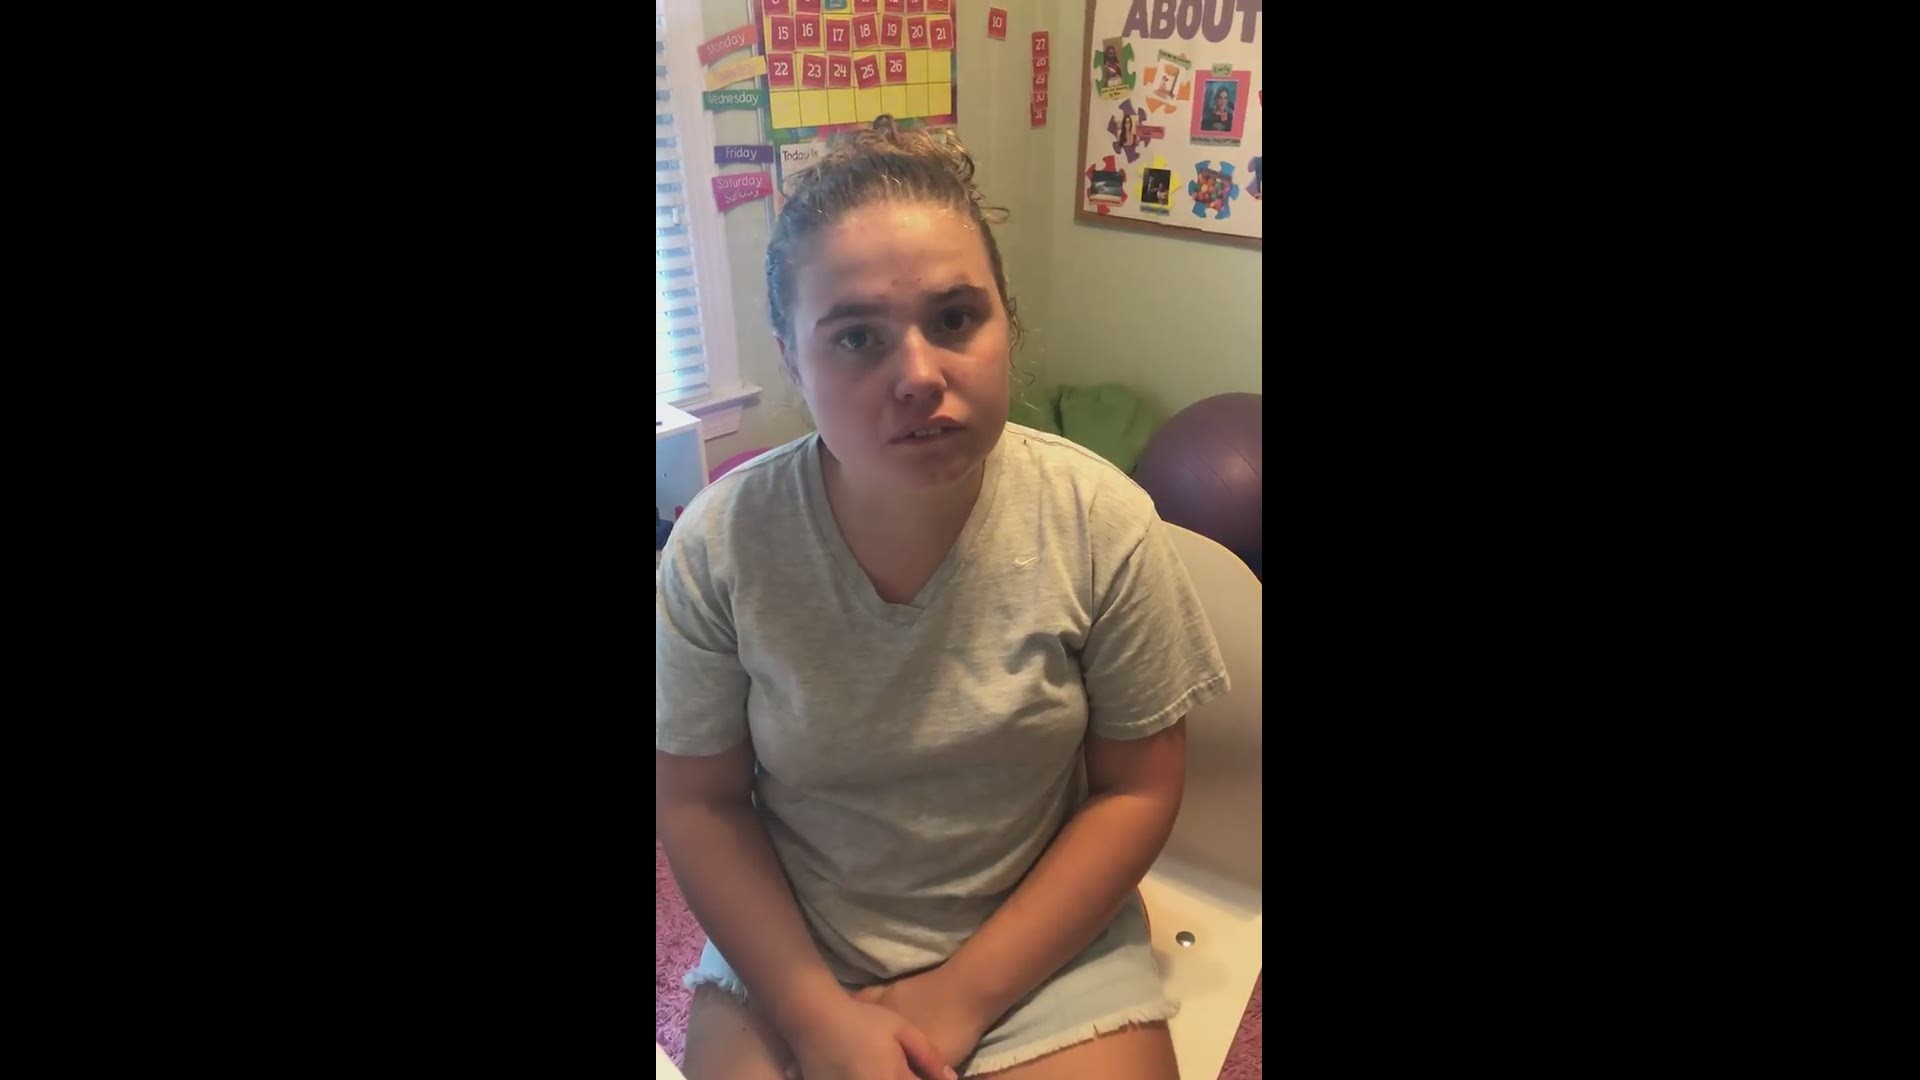 Huntersville teen with autism is hoping to meet her favorite artist Taylor Swift